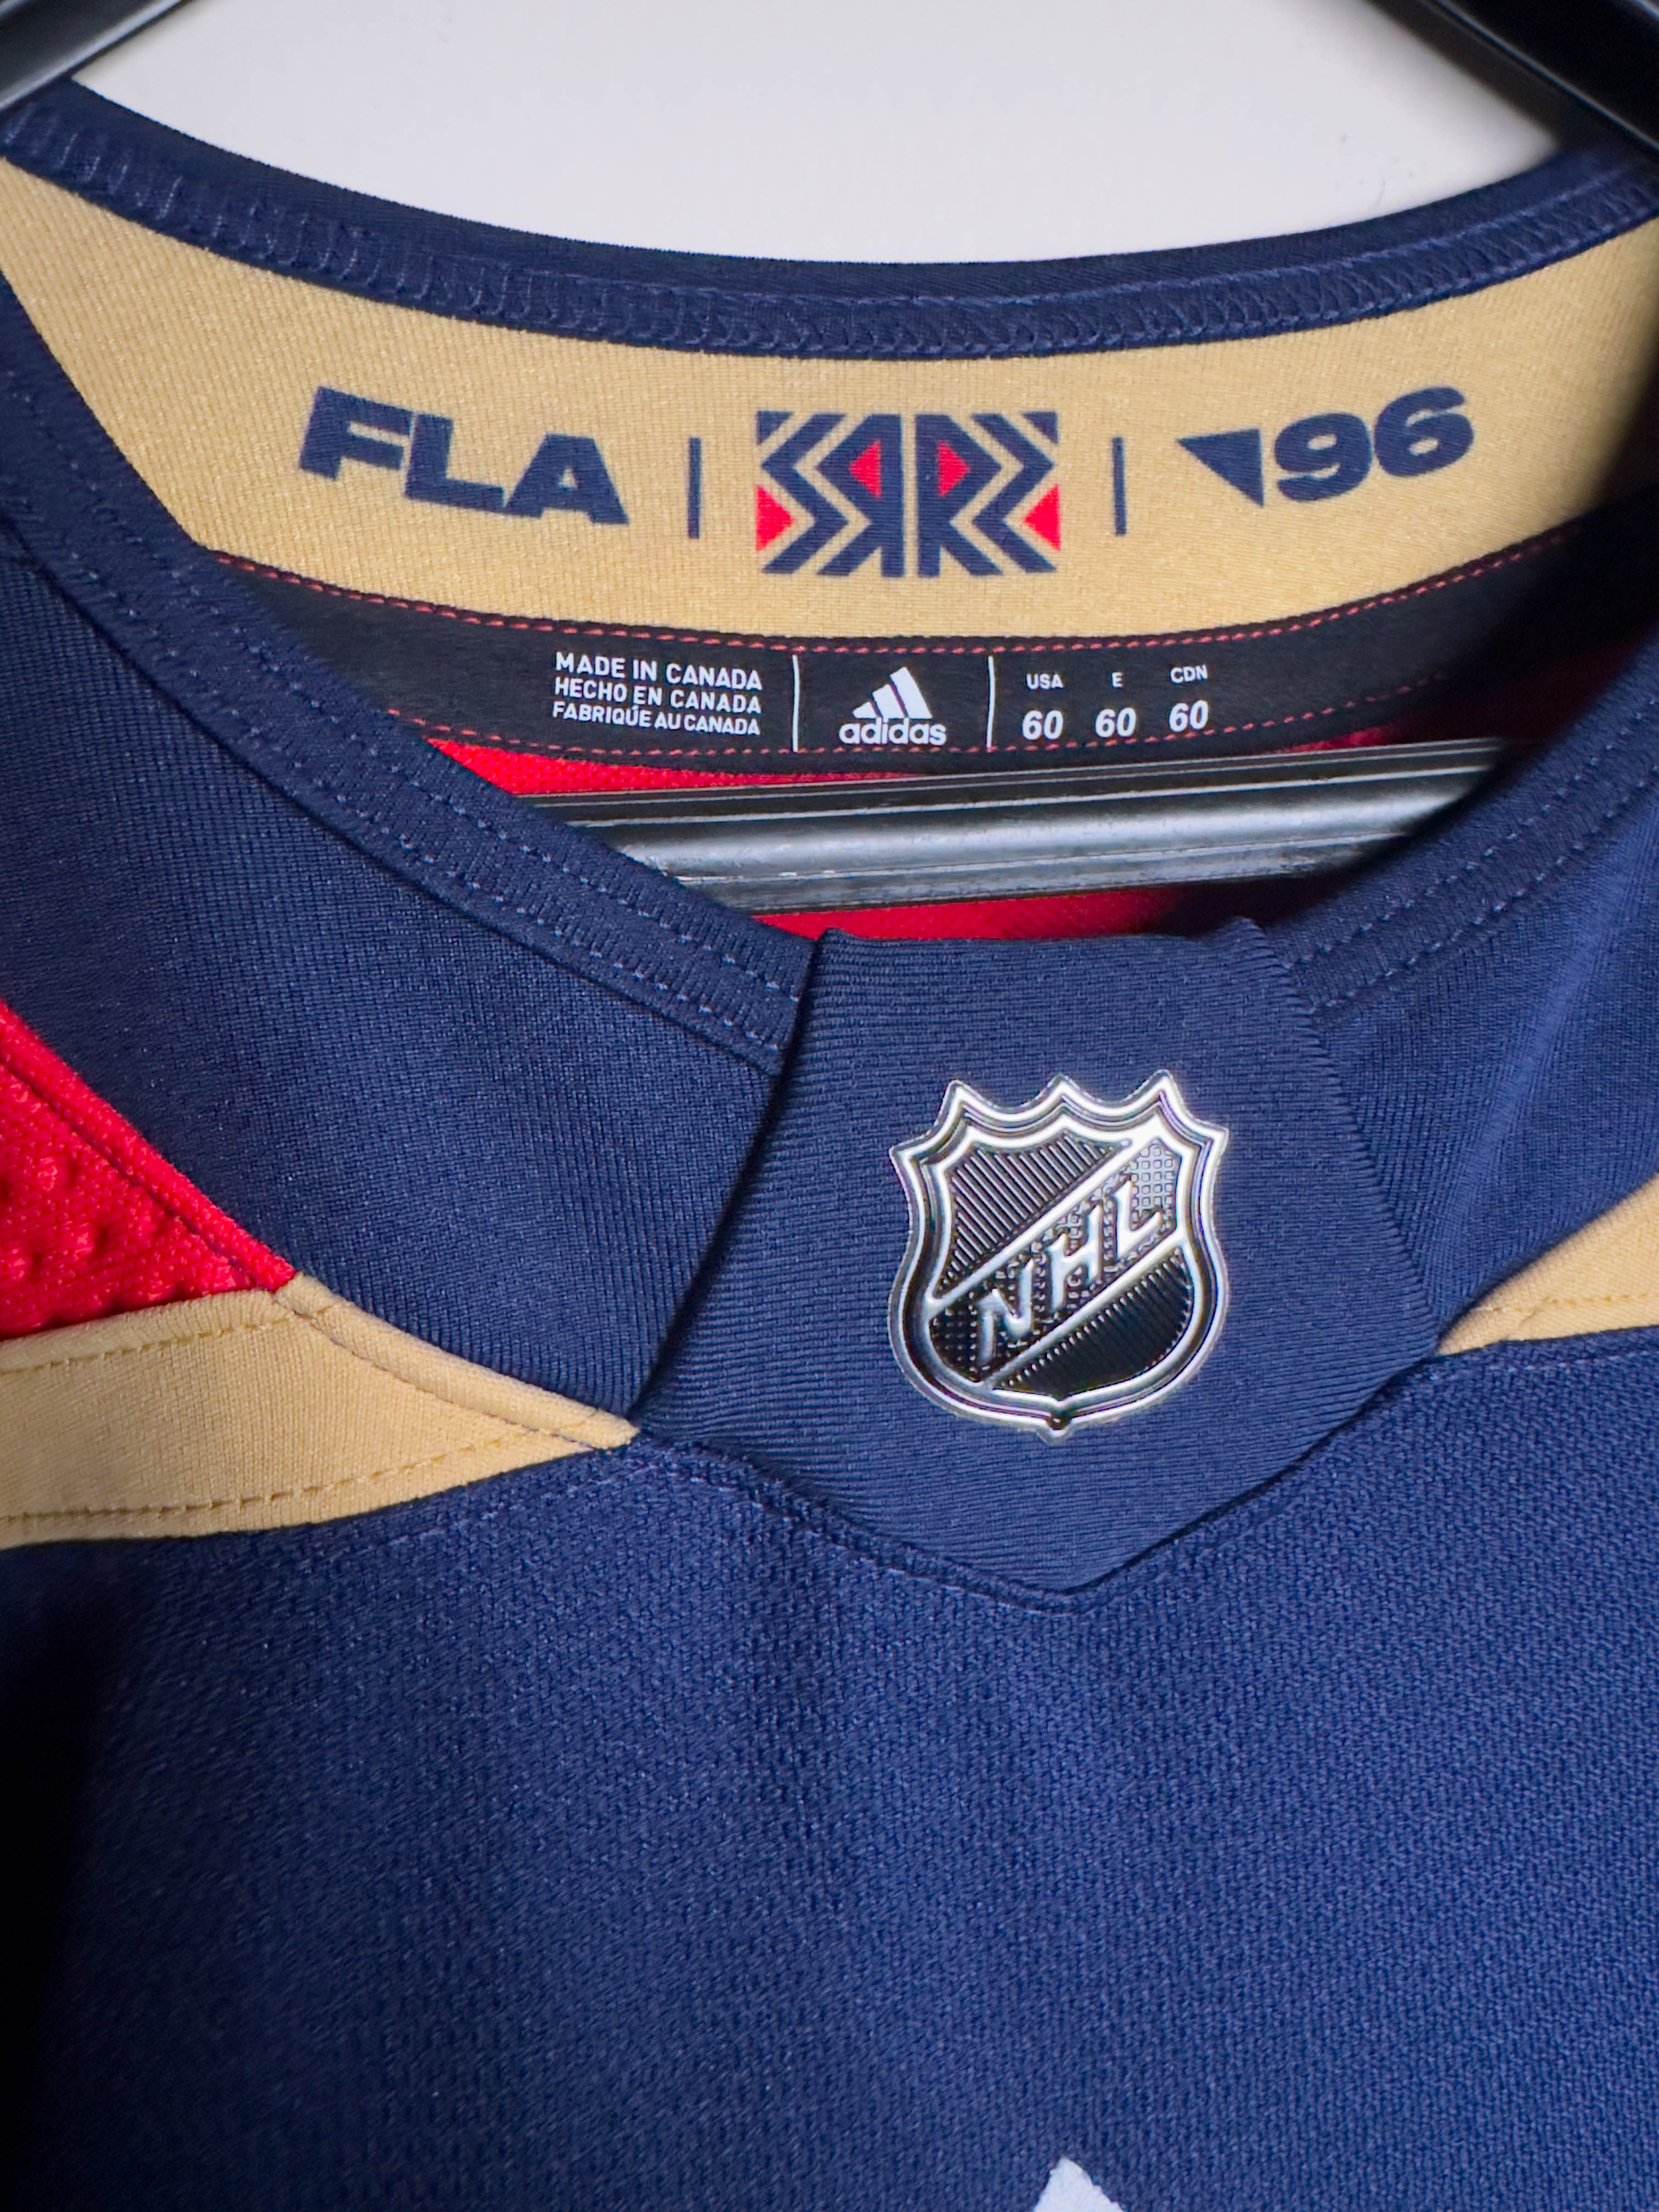 Florida Panthers NHL Adidas MiC Team Issued Alternate Jersey Size 60 (Player Size)